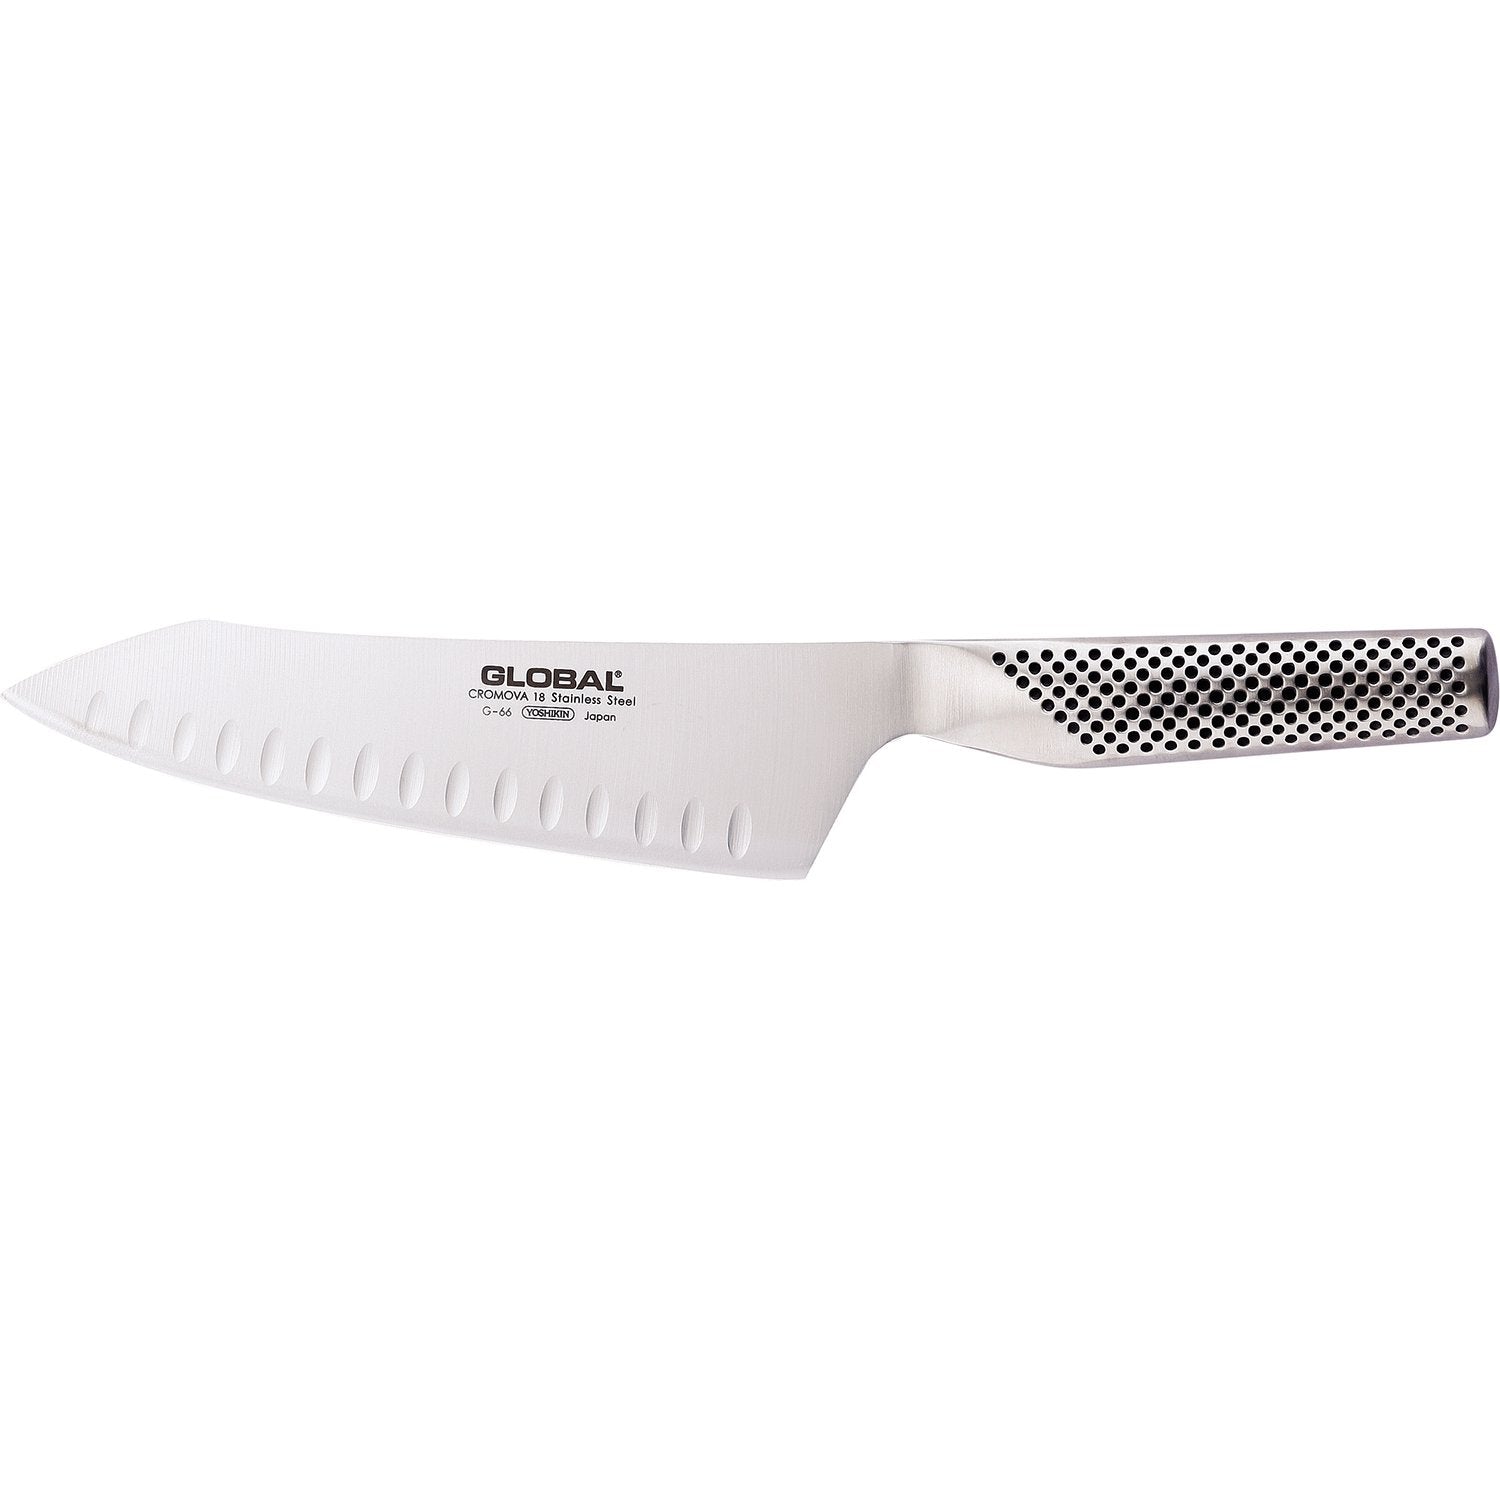 Global G 66 Oosterse chef -kokmes, 18 cm